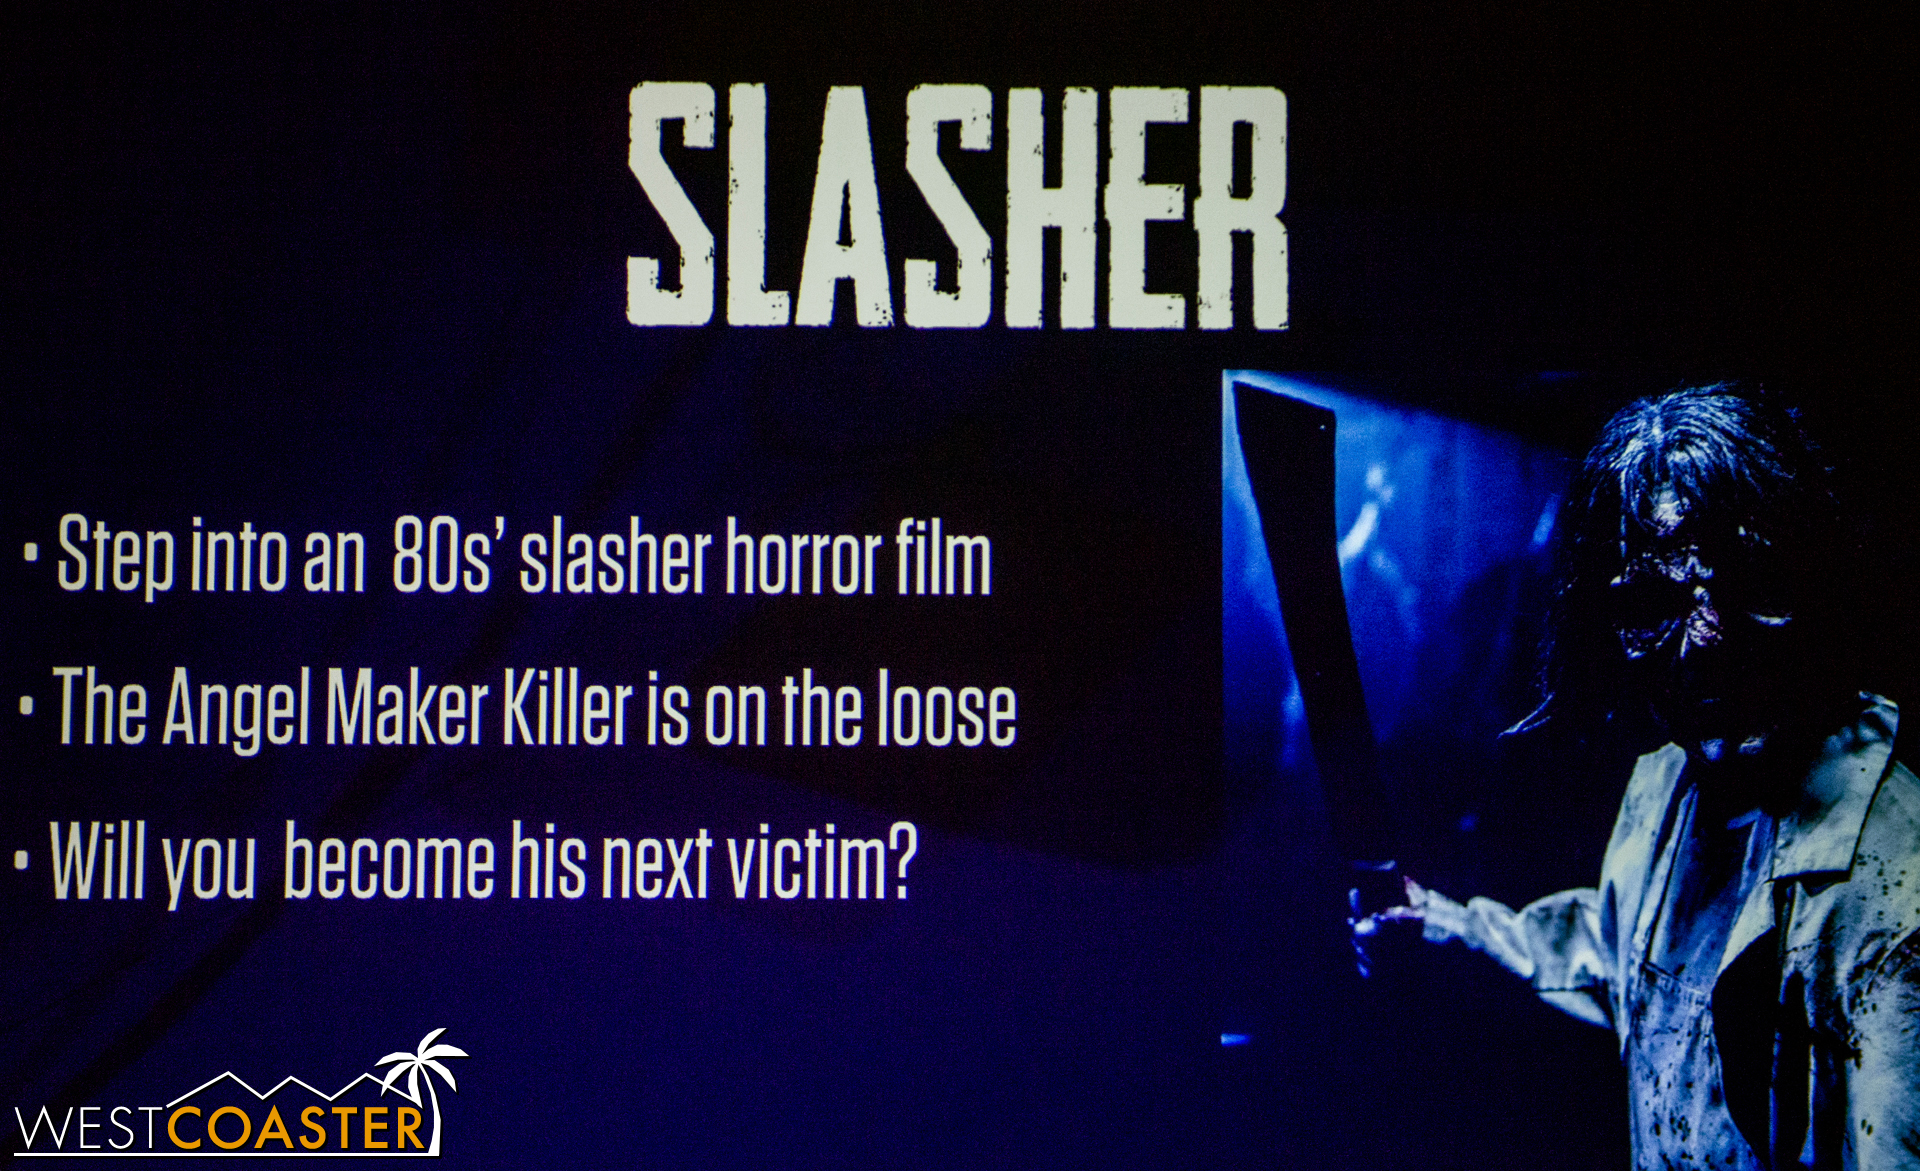  Slasher puts guests into a  Friday the 13th  or  Halloween  slasher flick.&nbsp; In this attraction, guests must escape the "Angel Maker Killer."&nbsp; Besides that, not much other information was given, but it sounds fun! 